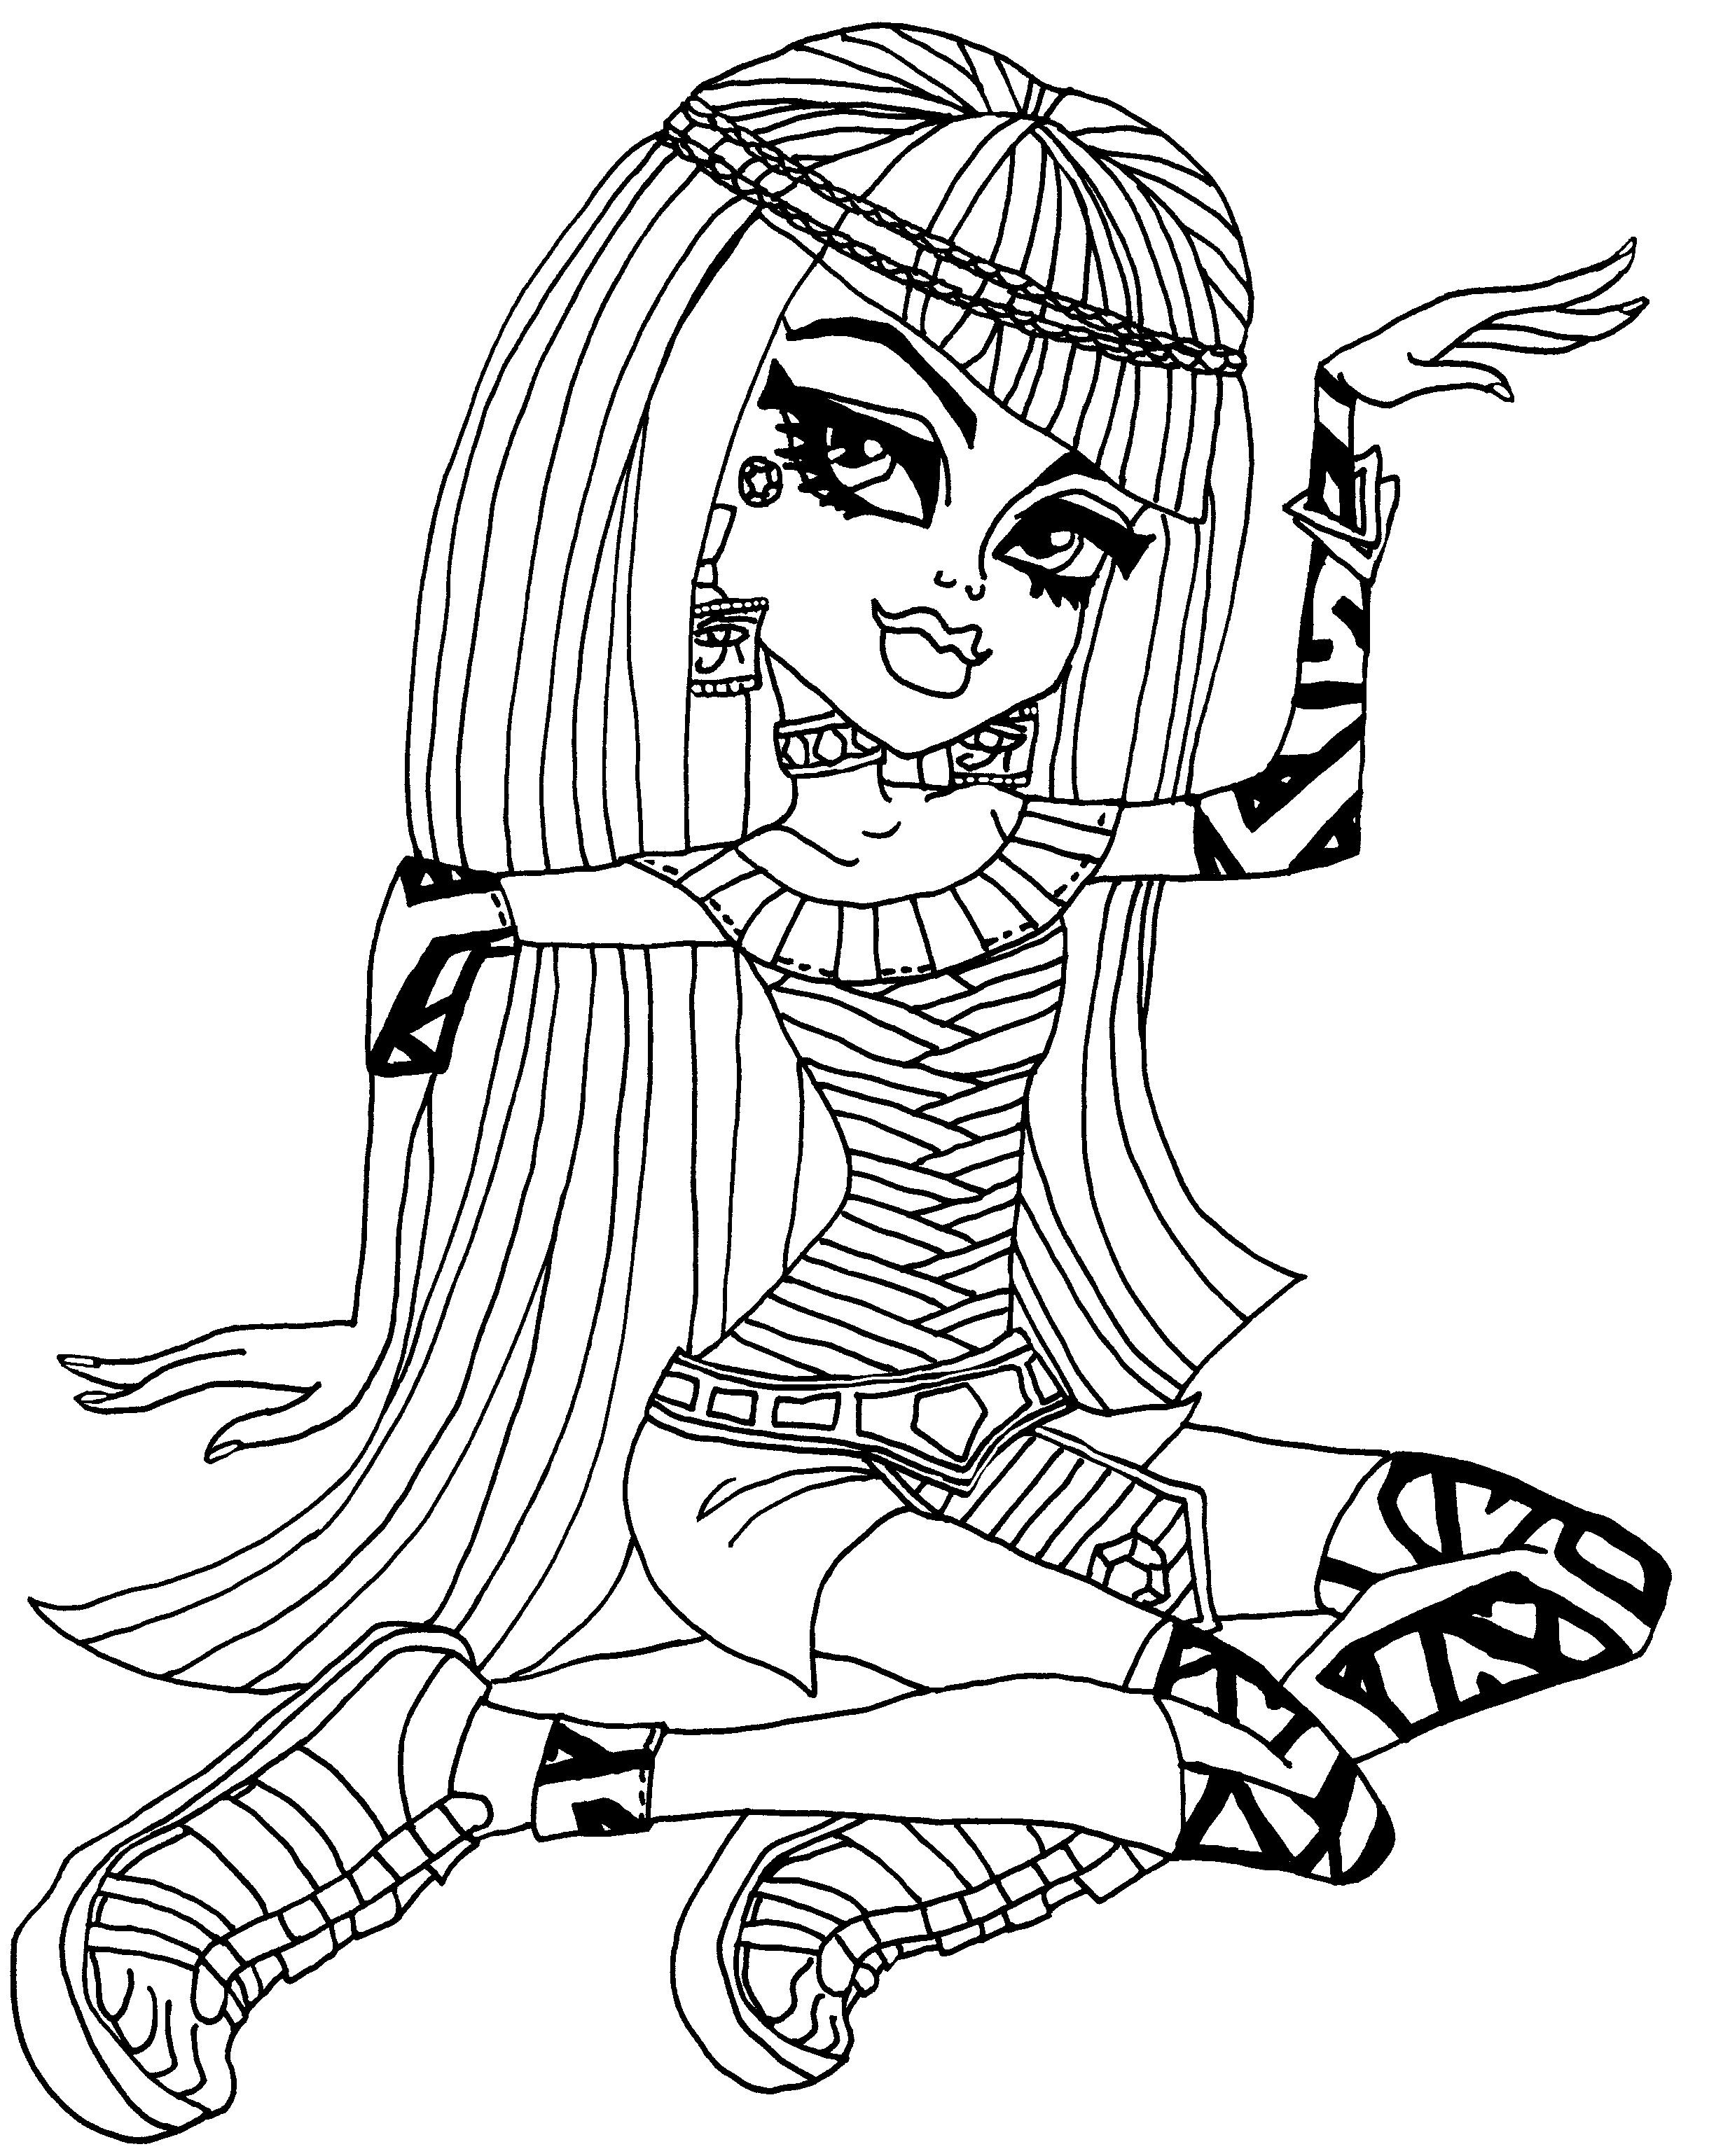 Monster High For Kids - Monster High Kids Coloring Pages - Monster High Free Printable Pictures